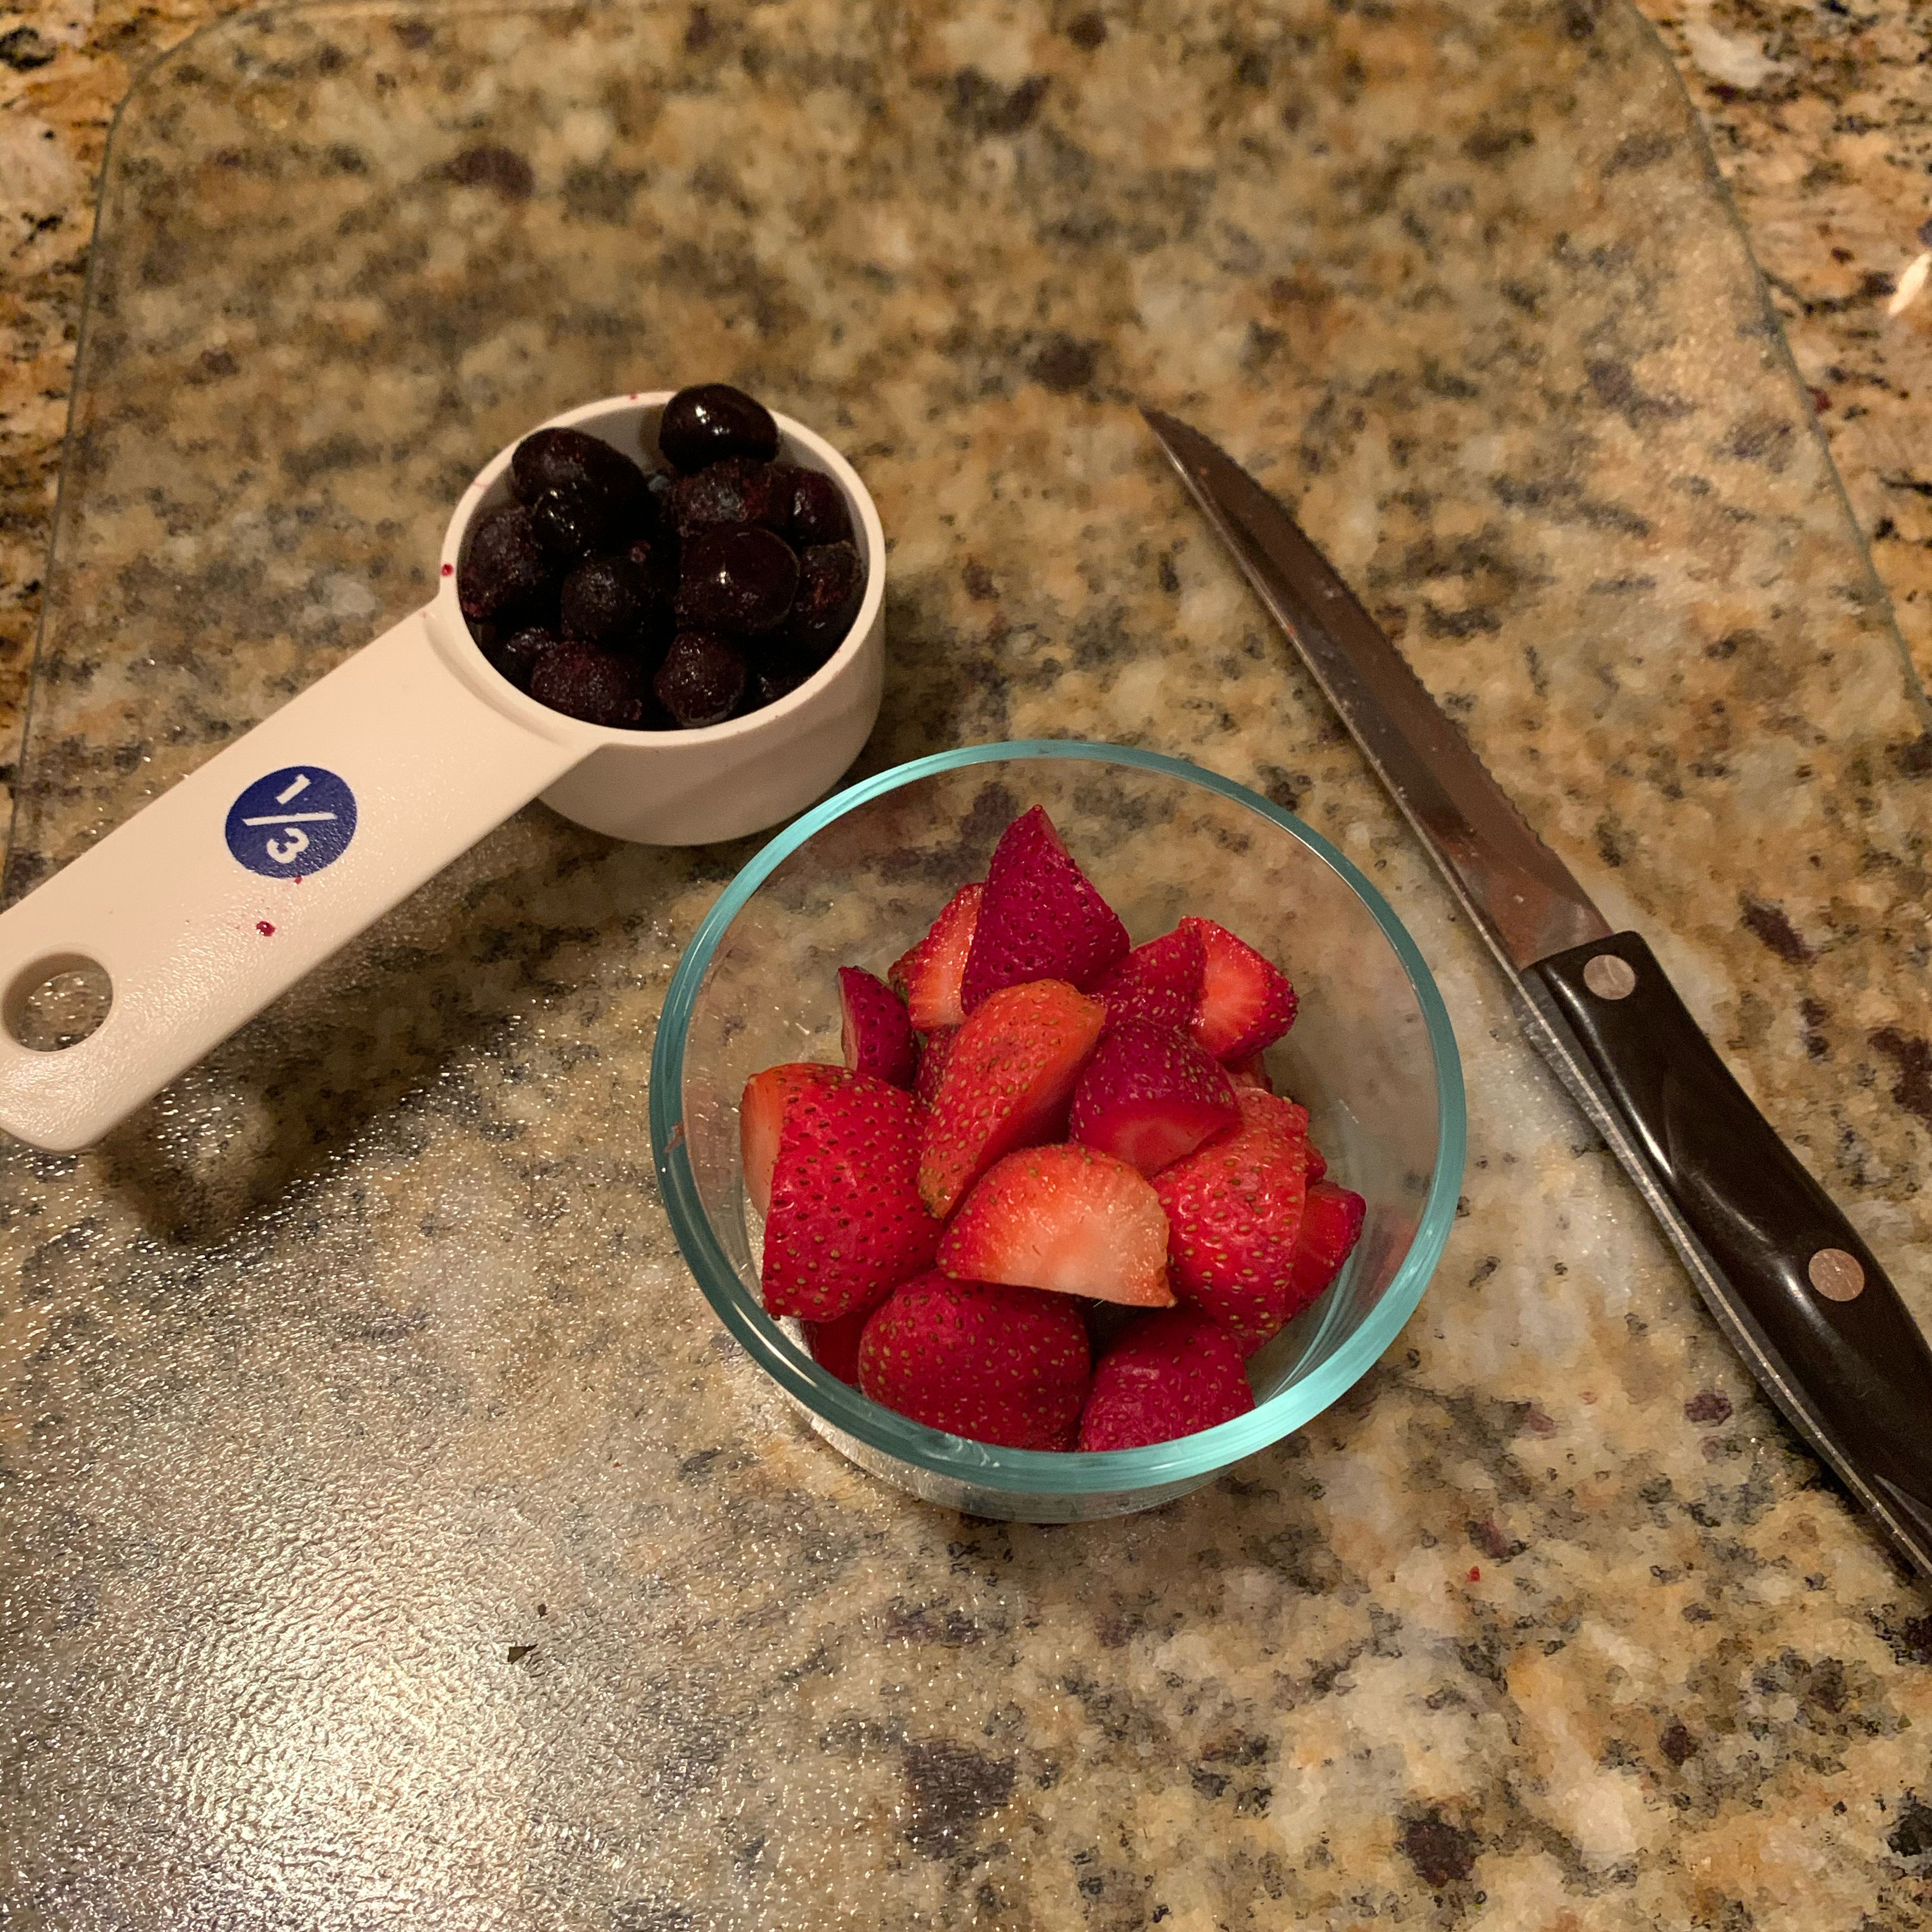 Wash strawberries and cut into halves. Combine with blueberries into a bowl.